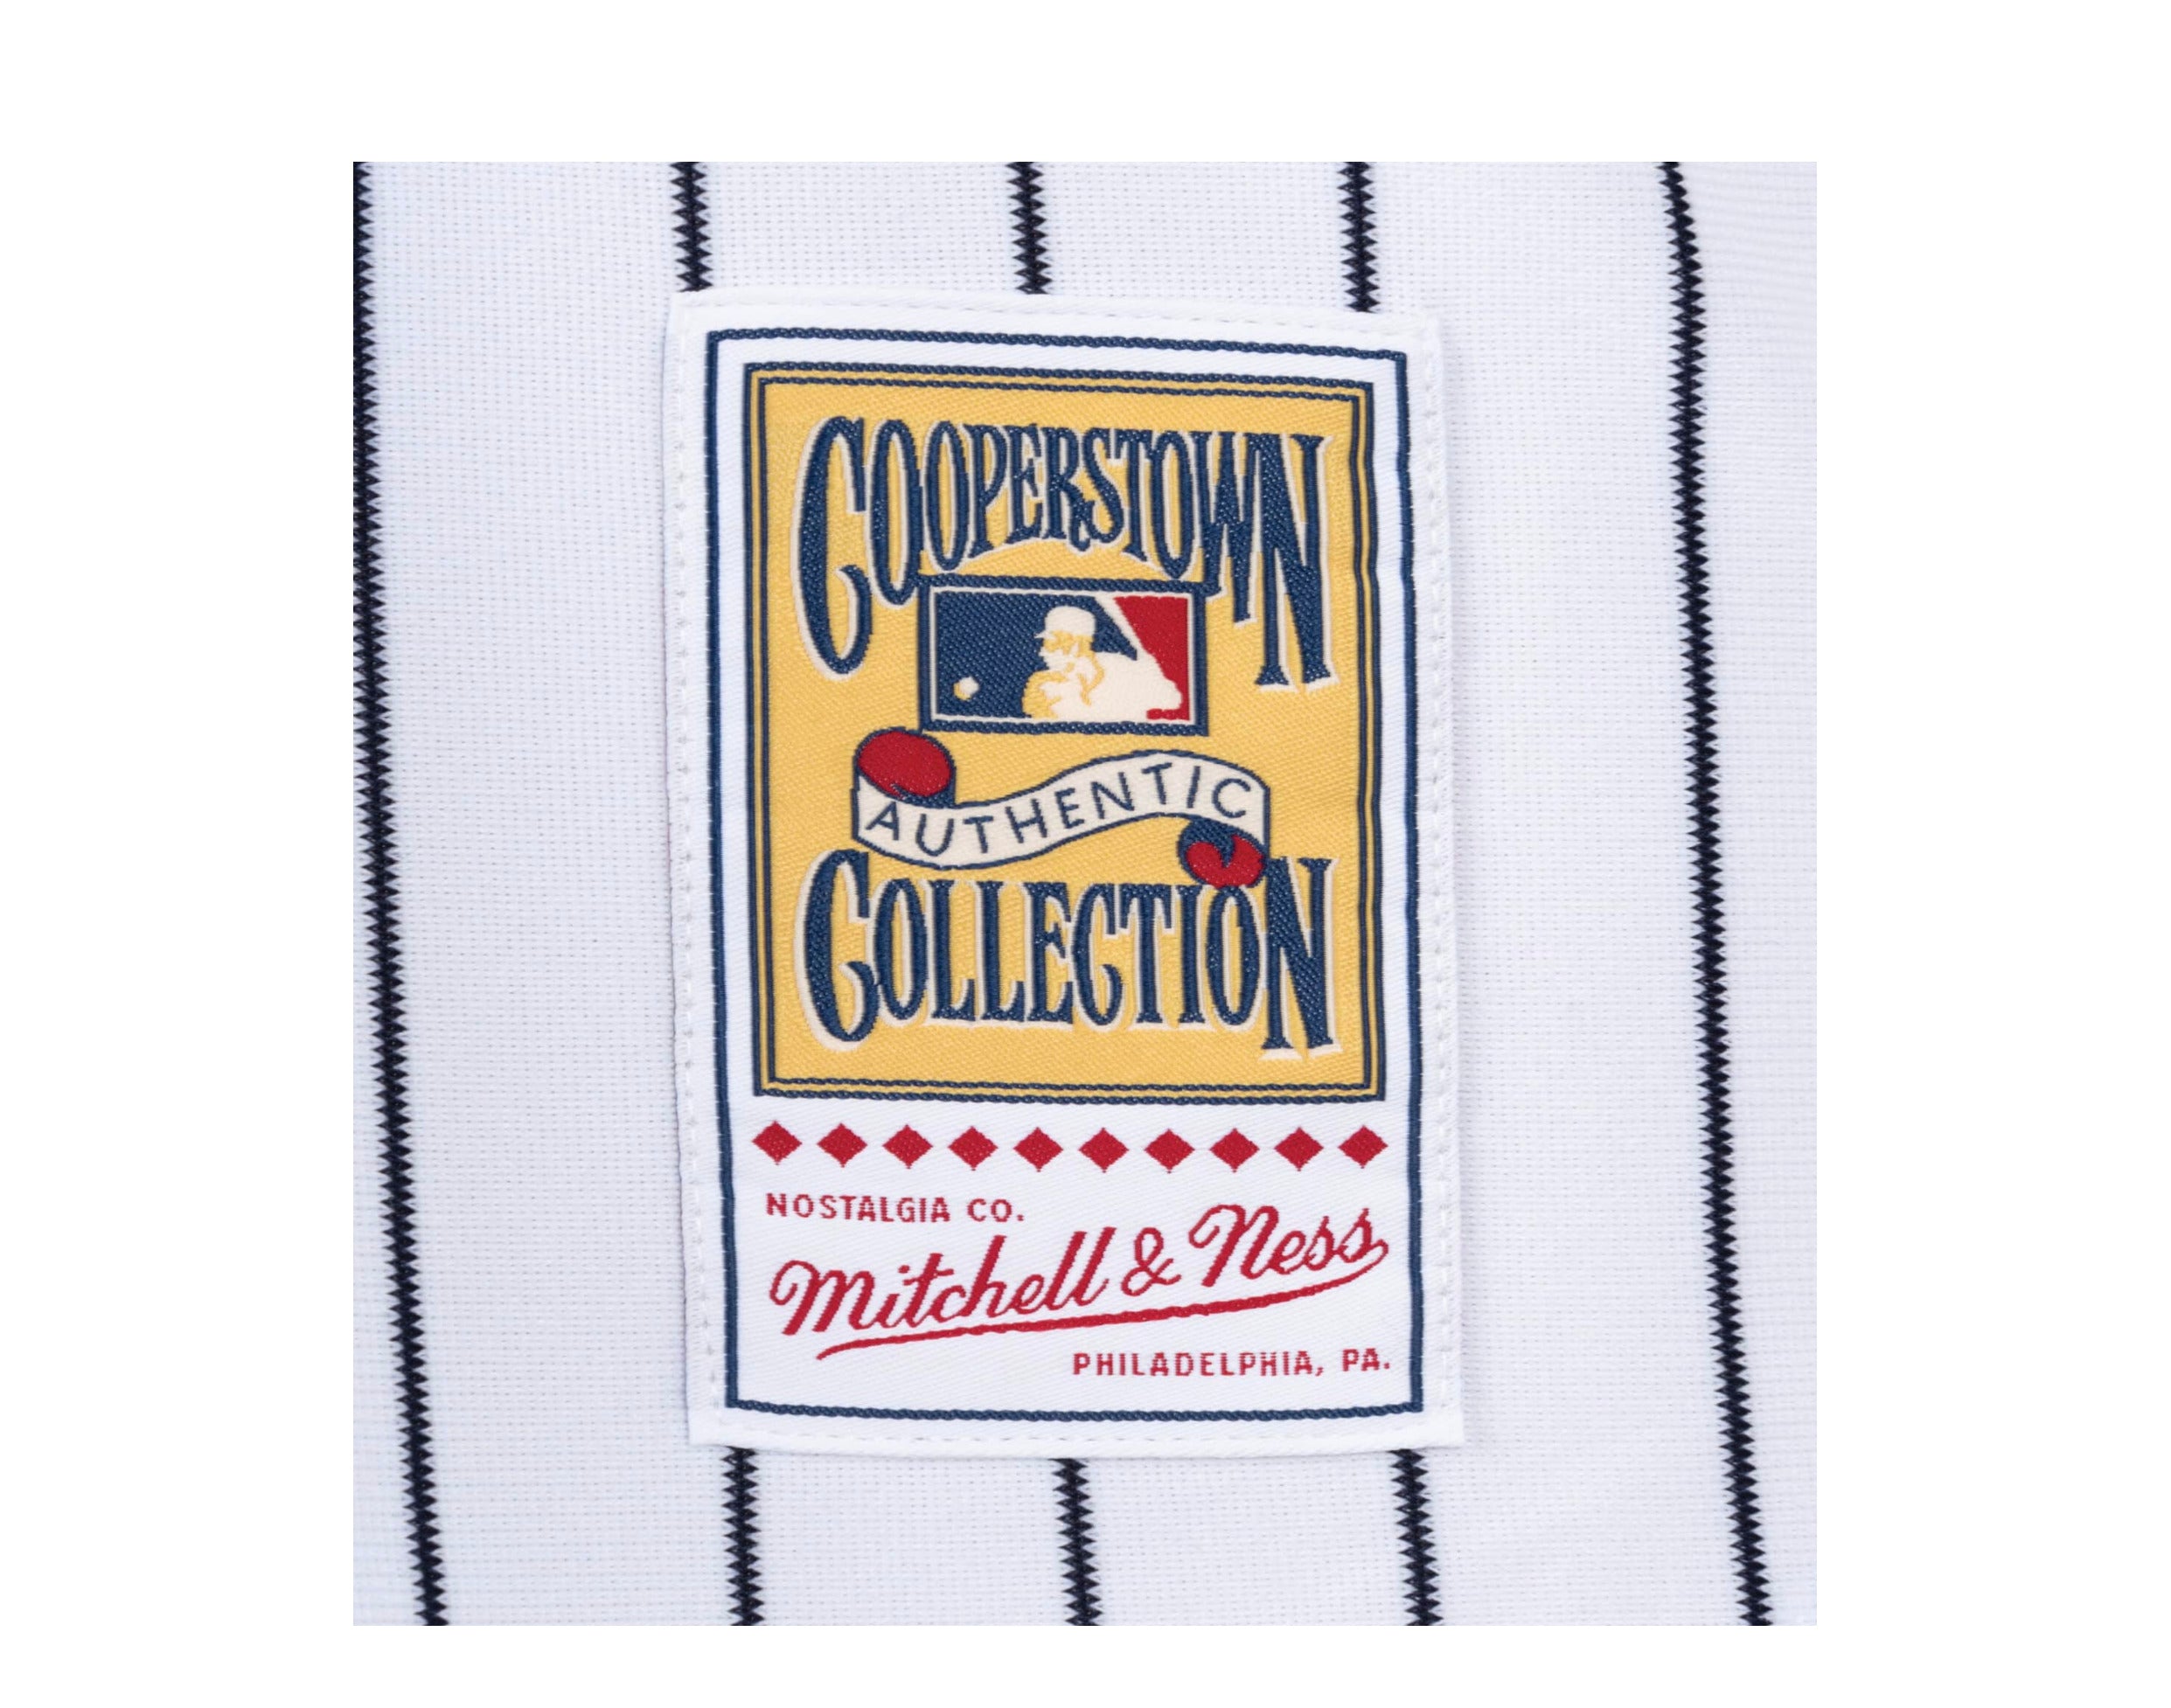 Mitchell & Ness Authentic Jersey New York Yankees Home 1995 Don Mattingly